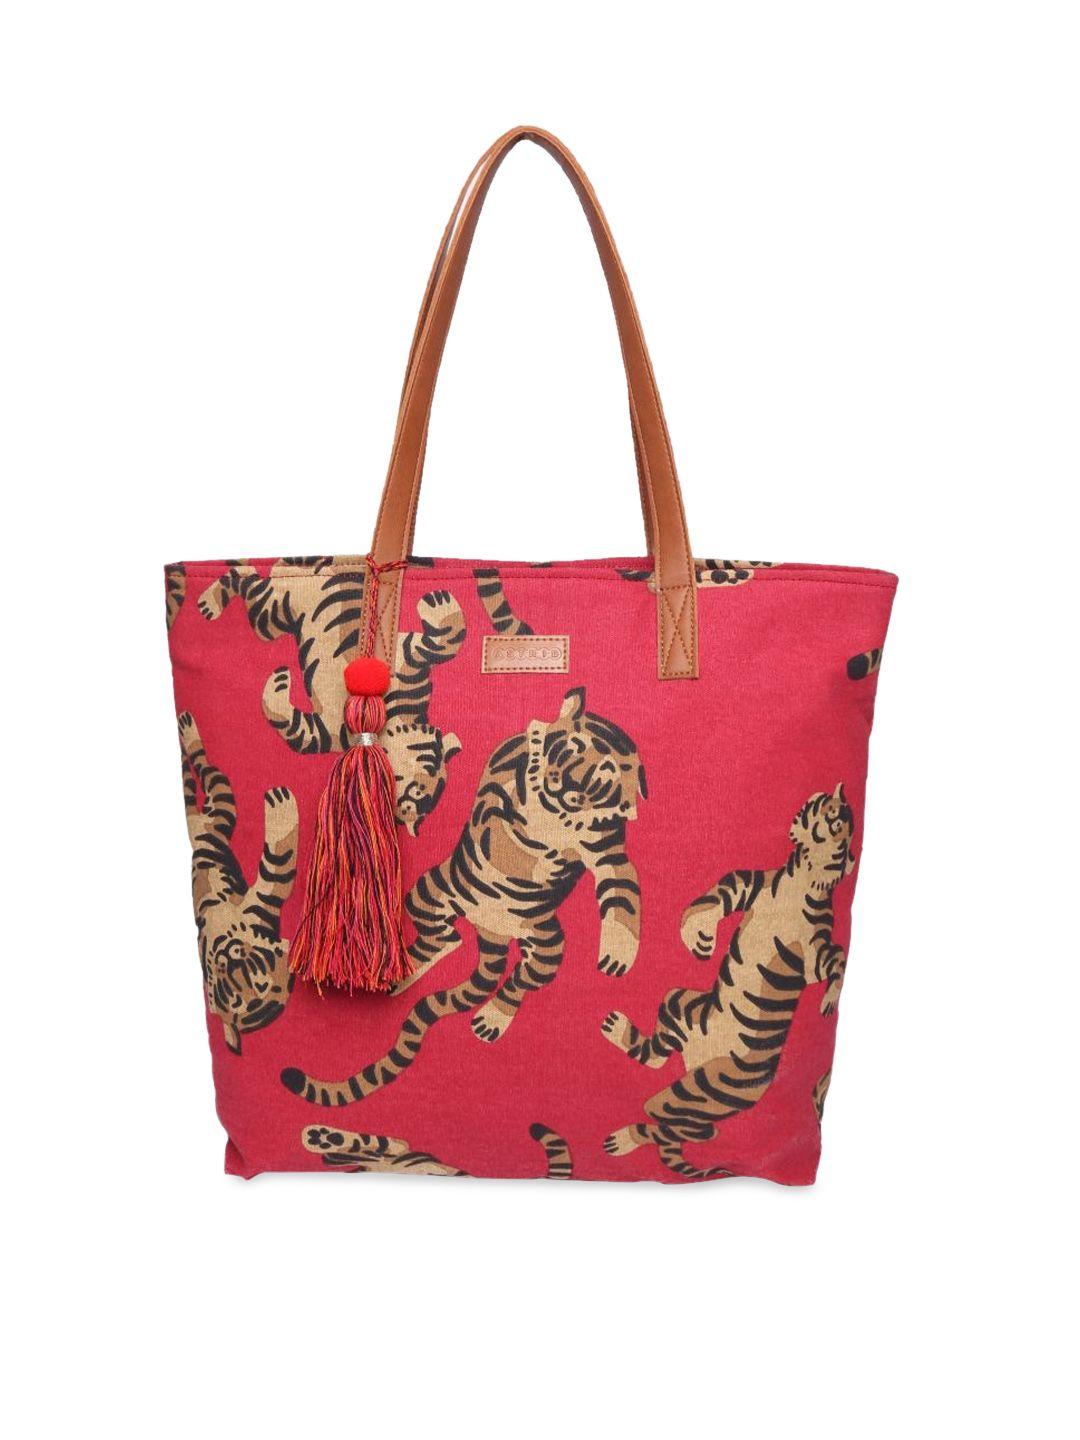 astrid red animal printed oversized shopper tote bag with tasselled